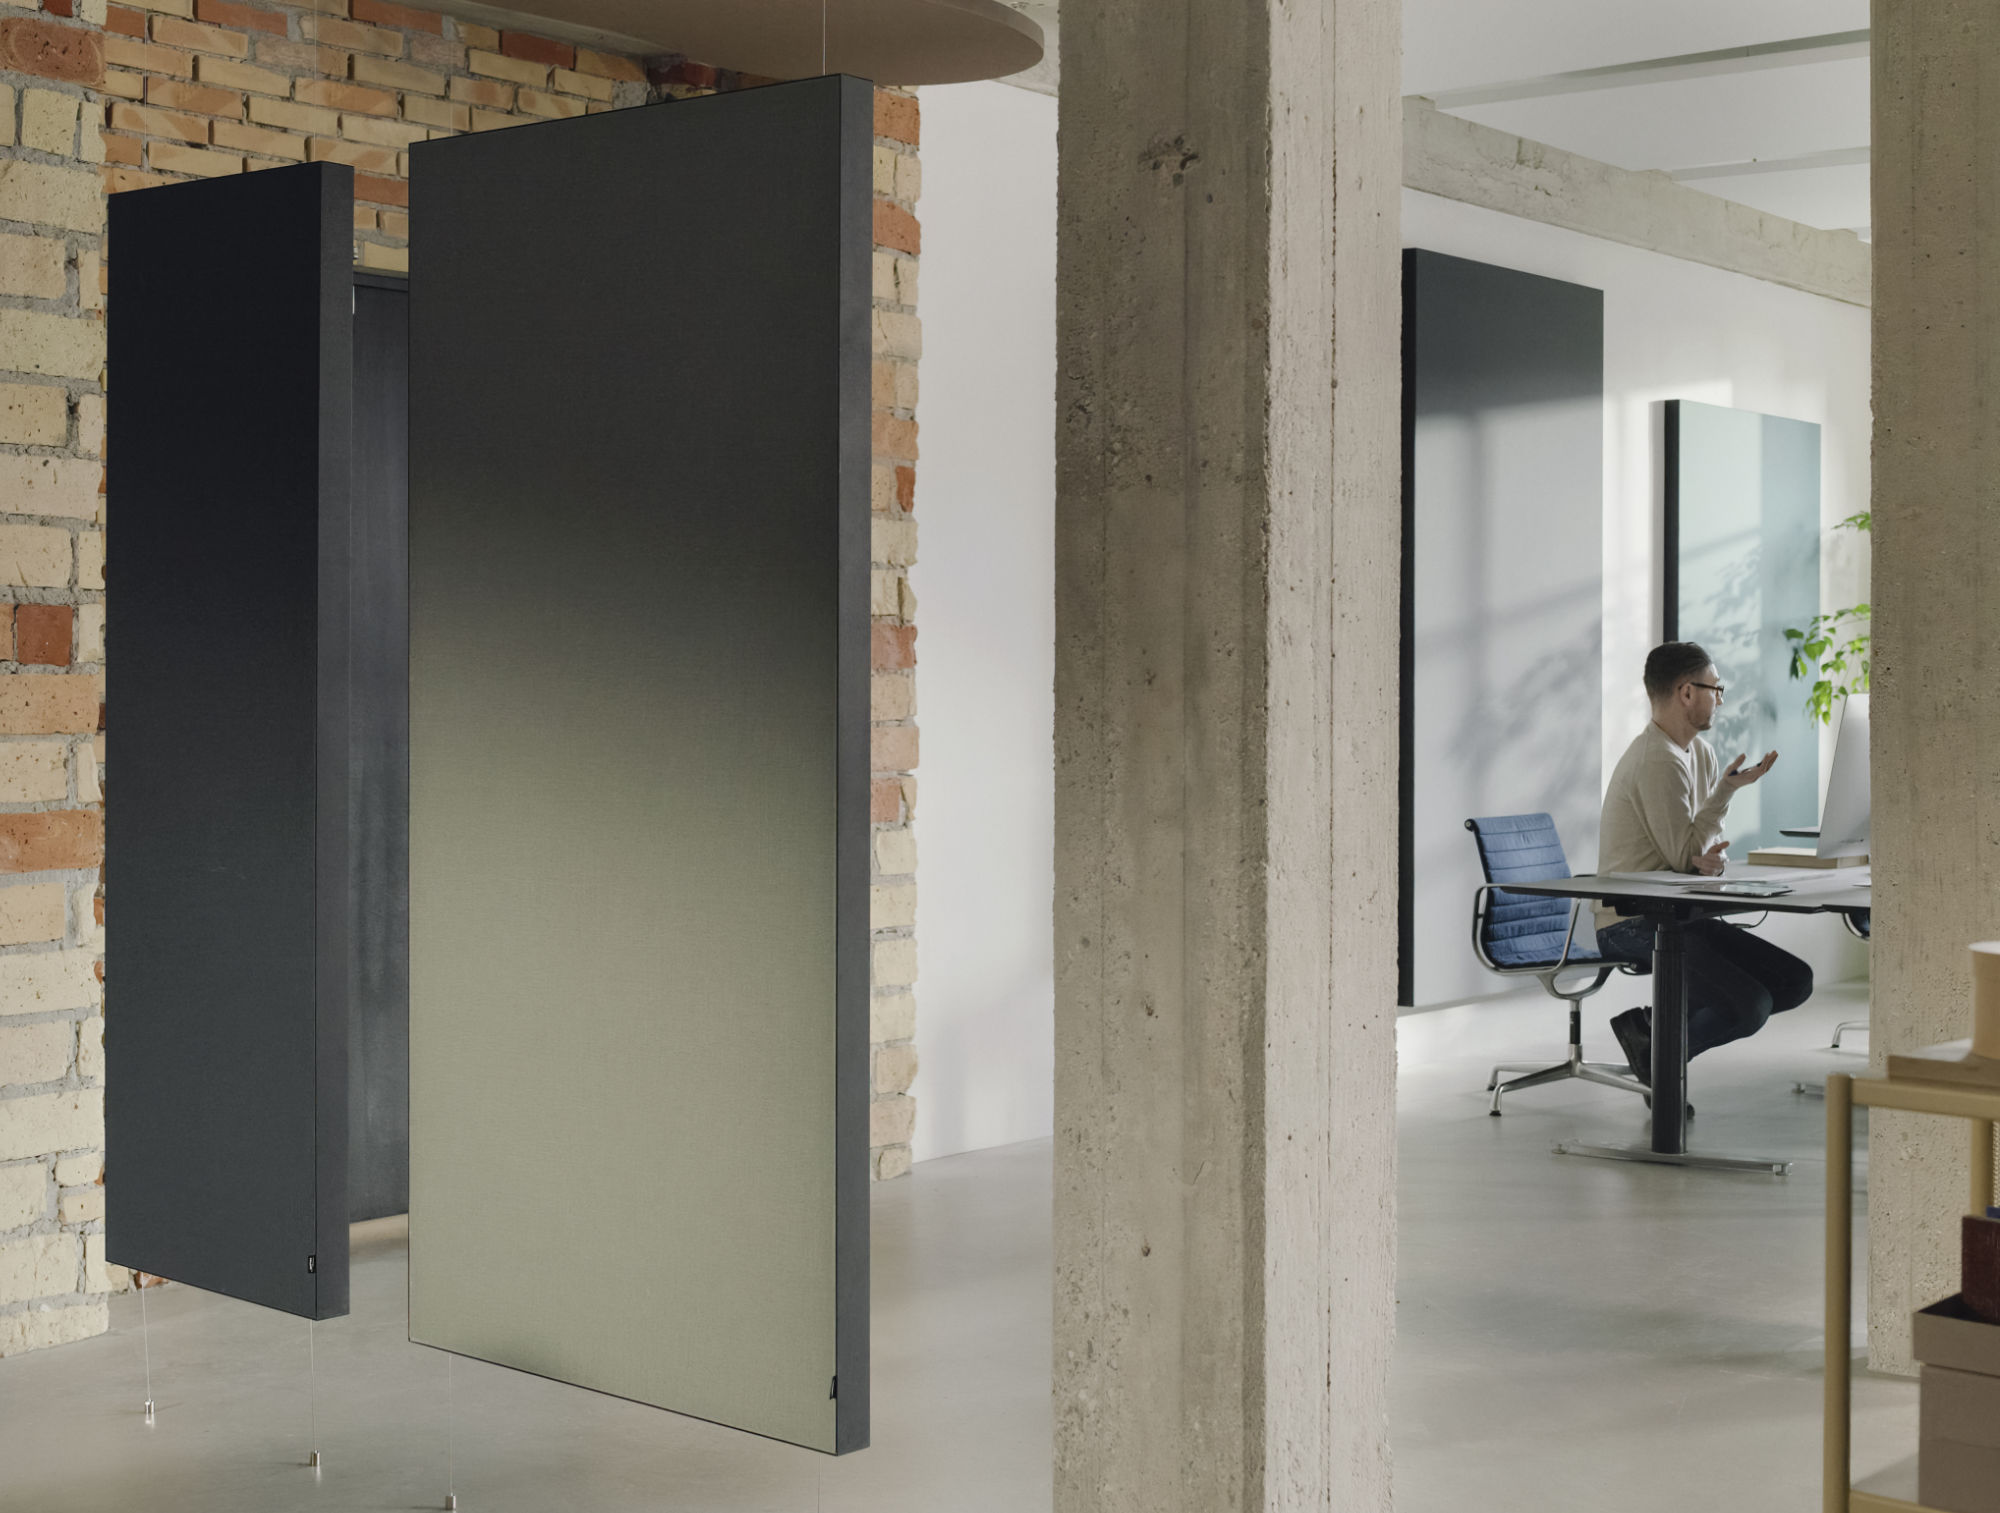 Bring privacy to open plan offices with Canva Hanging Divider